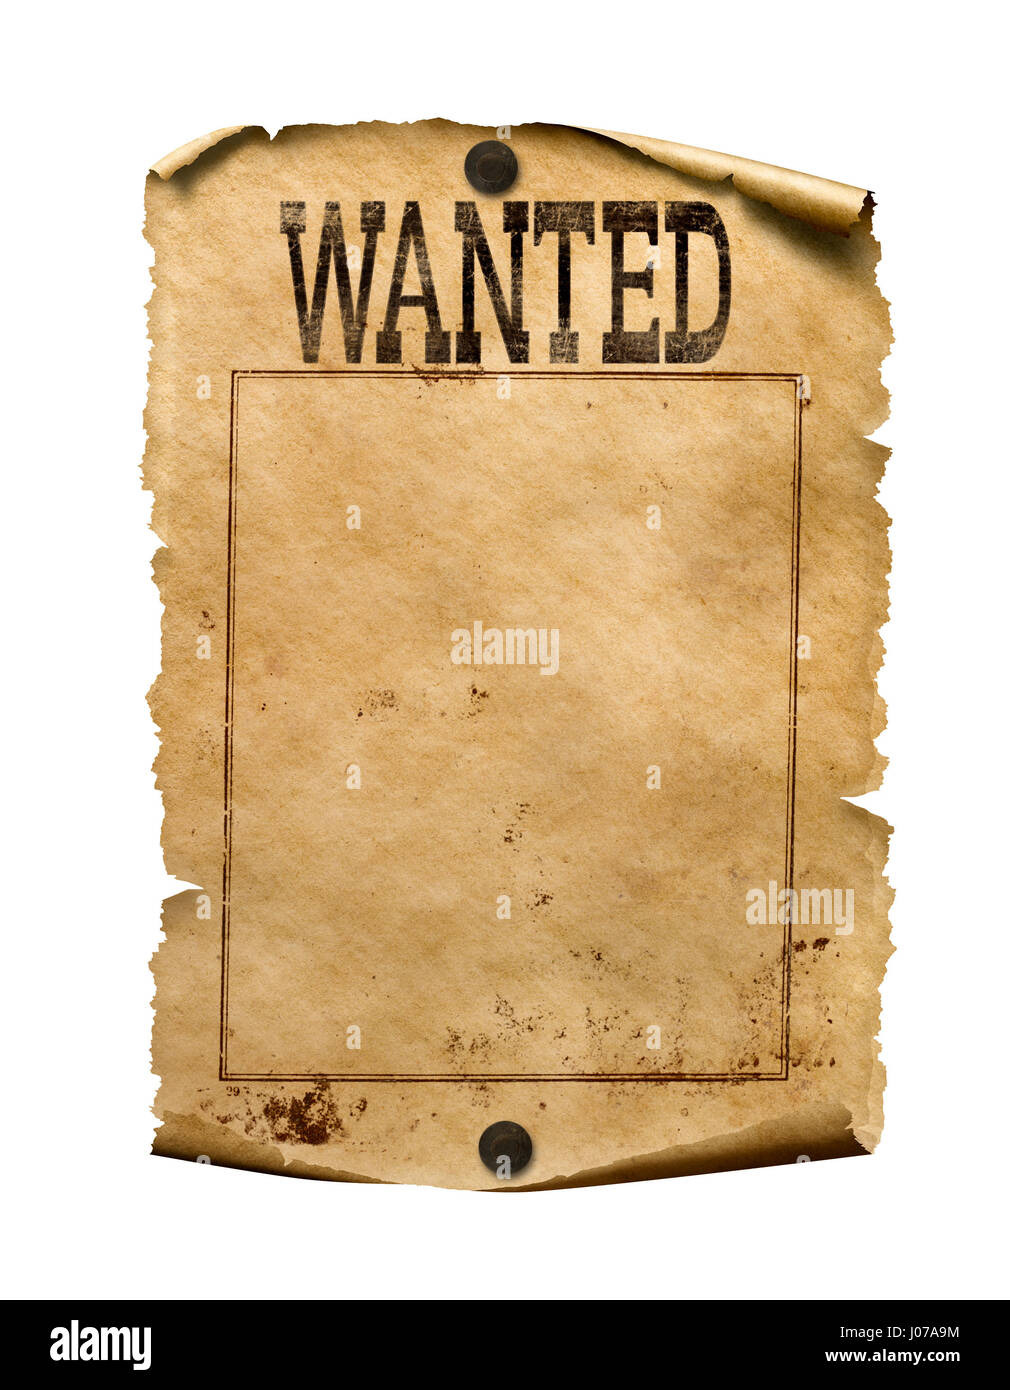 Wanted for reward poster 3d illustration isolated Stock Photo